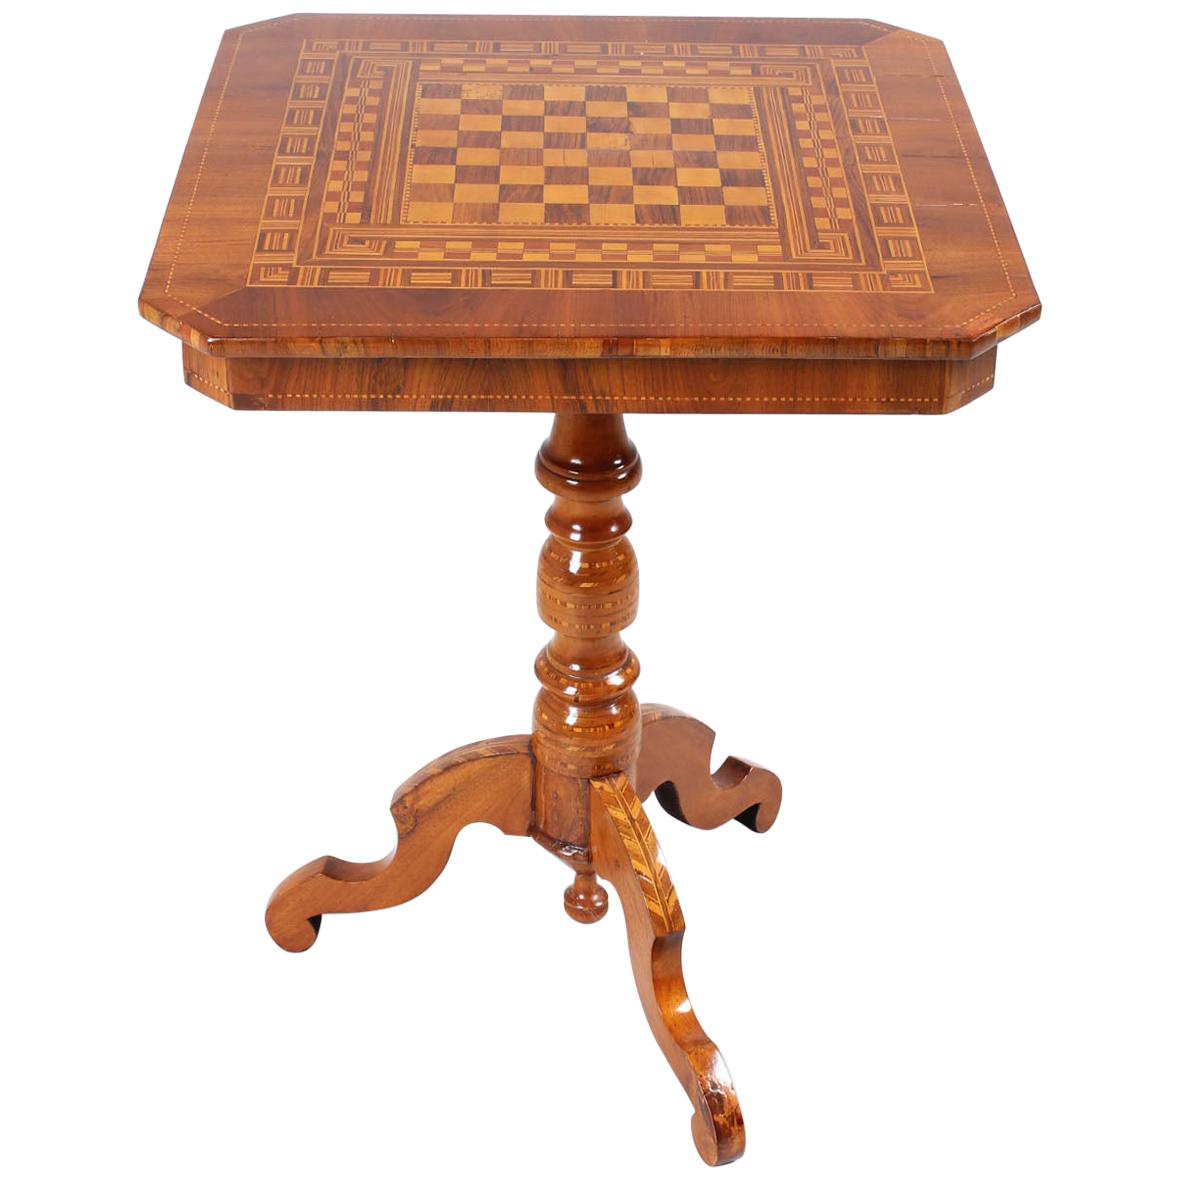 19th Century Chess Table, Italy 'Sorrento', circa 1850, Walnut with Marquetry